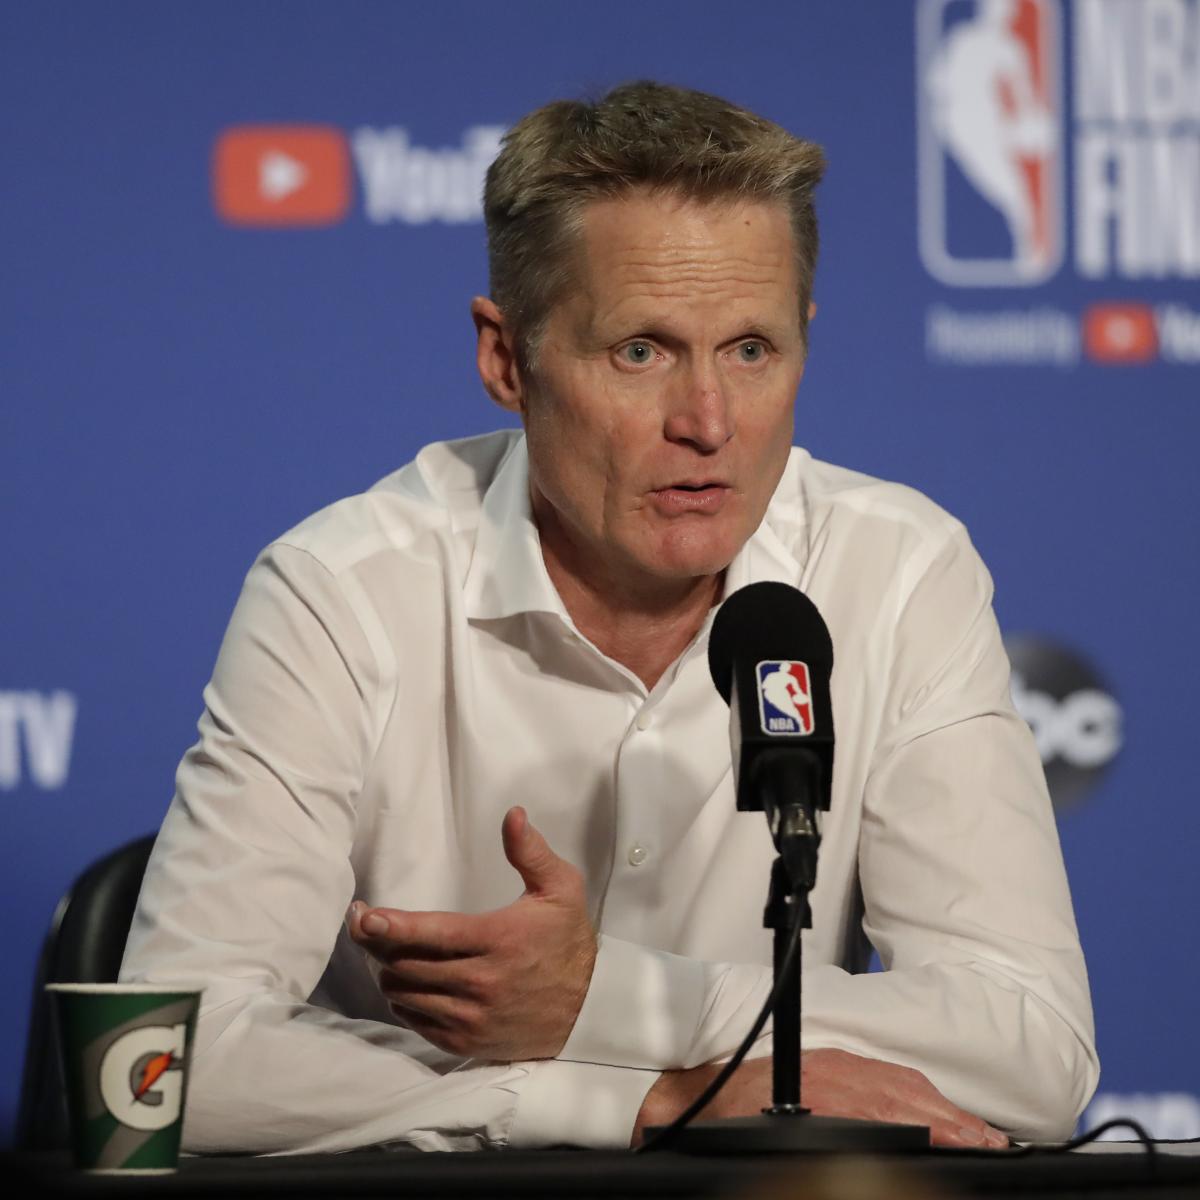 Steve Kerr on Future of Warriors: 'Our Team Is Going to Look a Lot